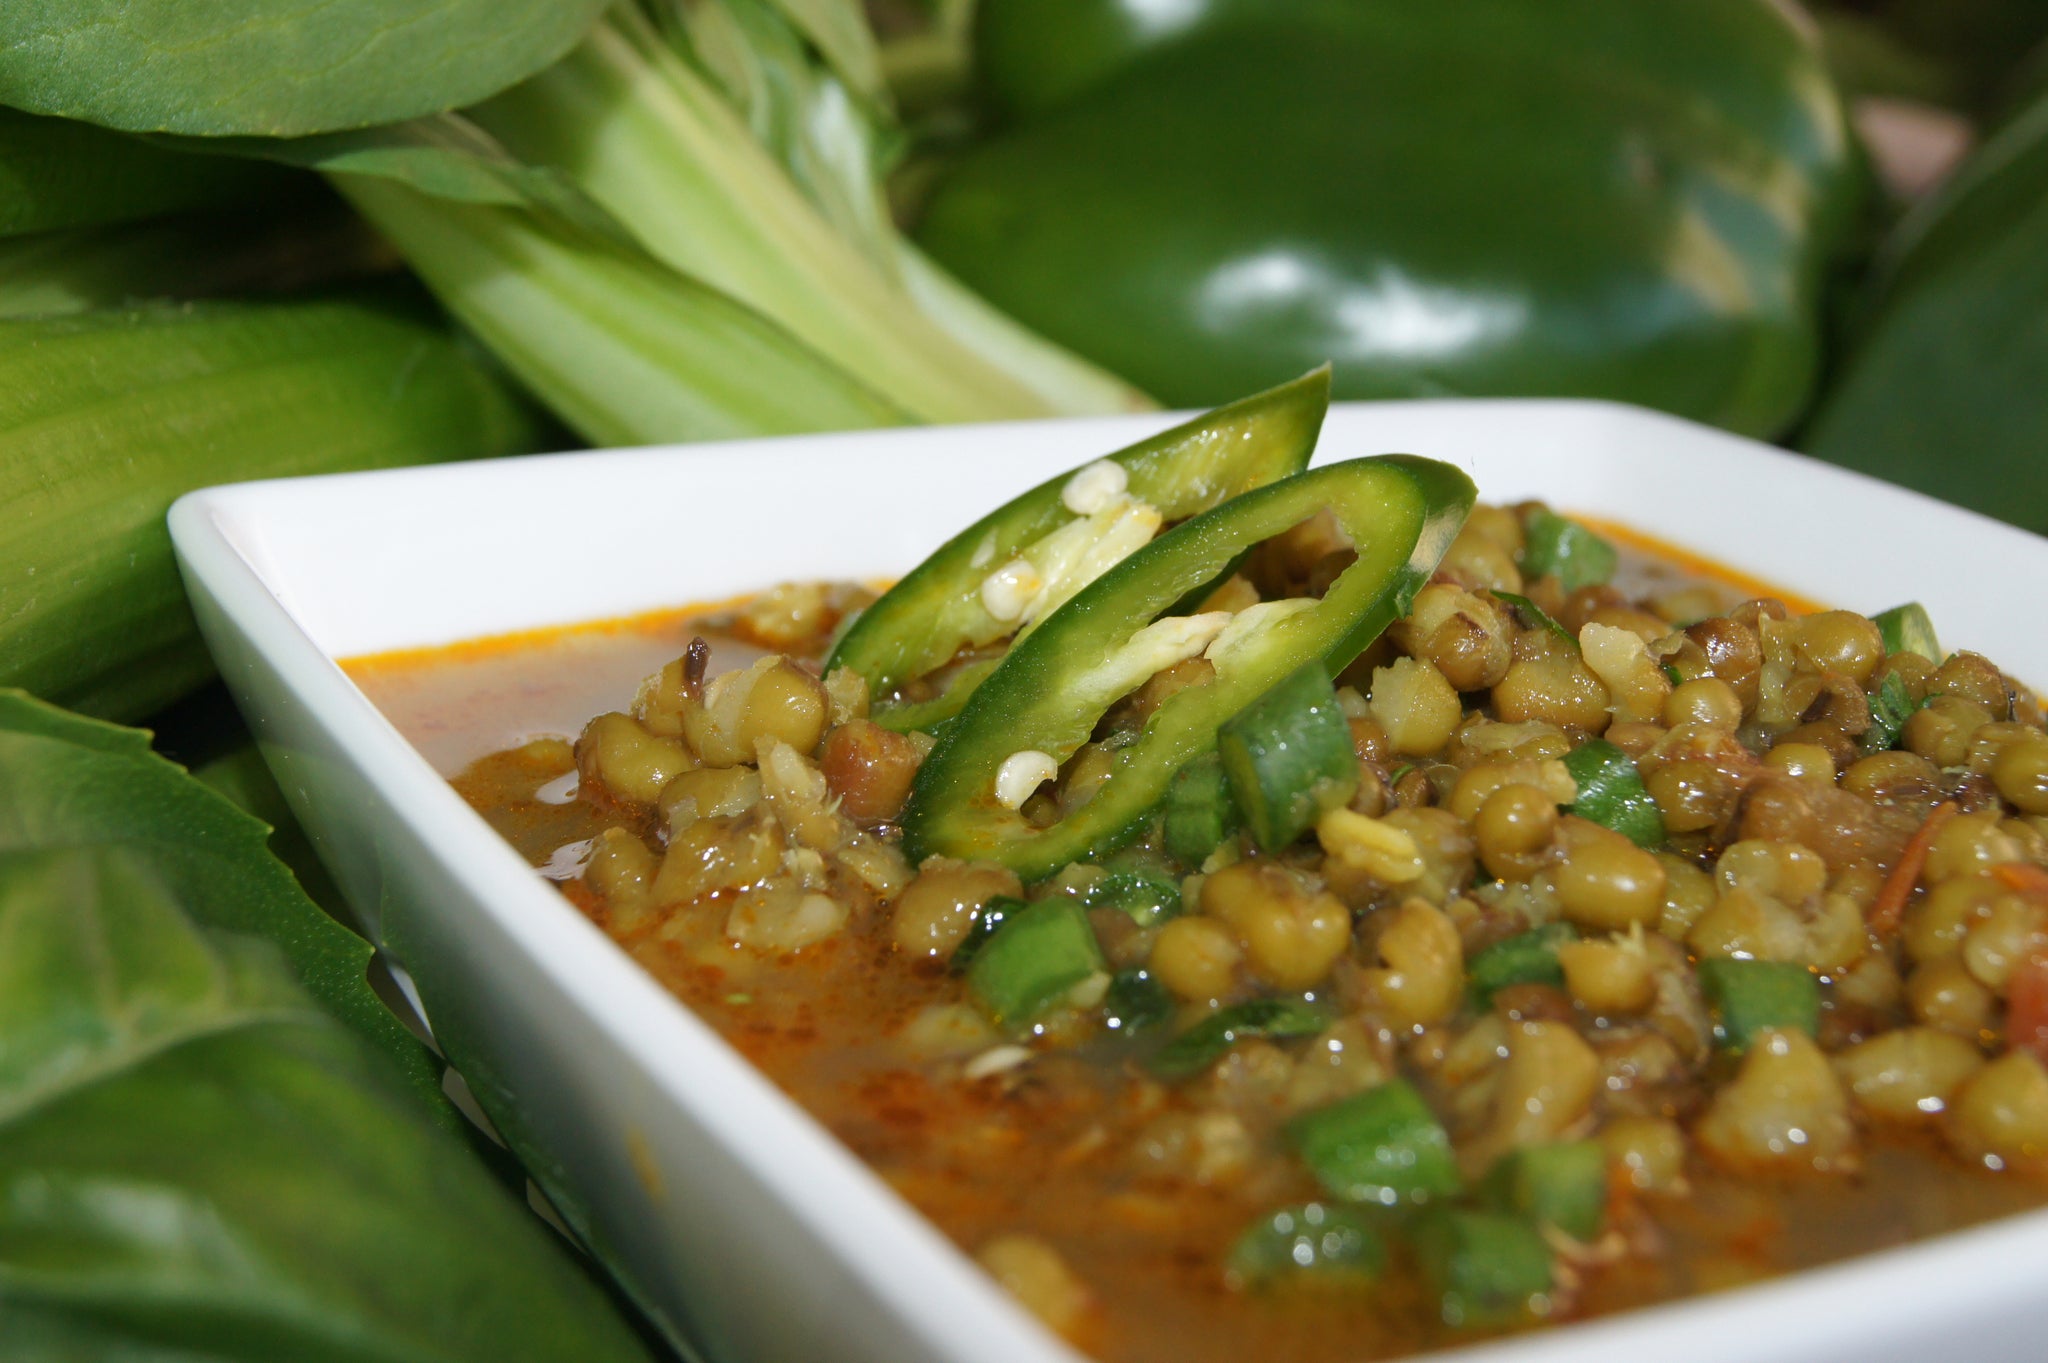 Organic green mung beans feature in this dhal or dahl. Easy meal packs are made in minutes